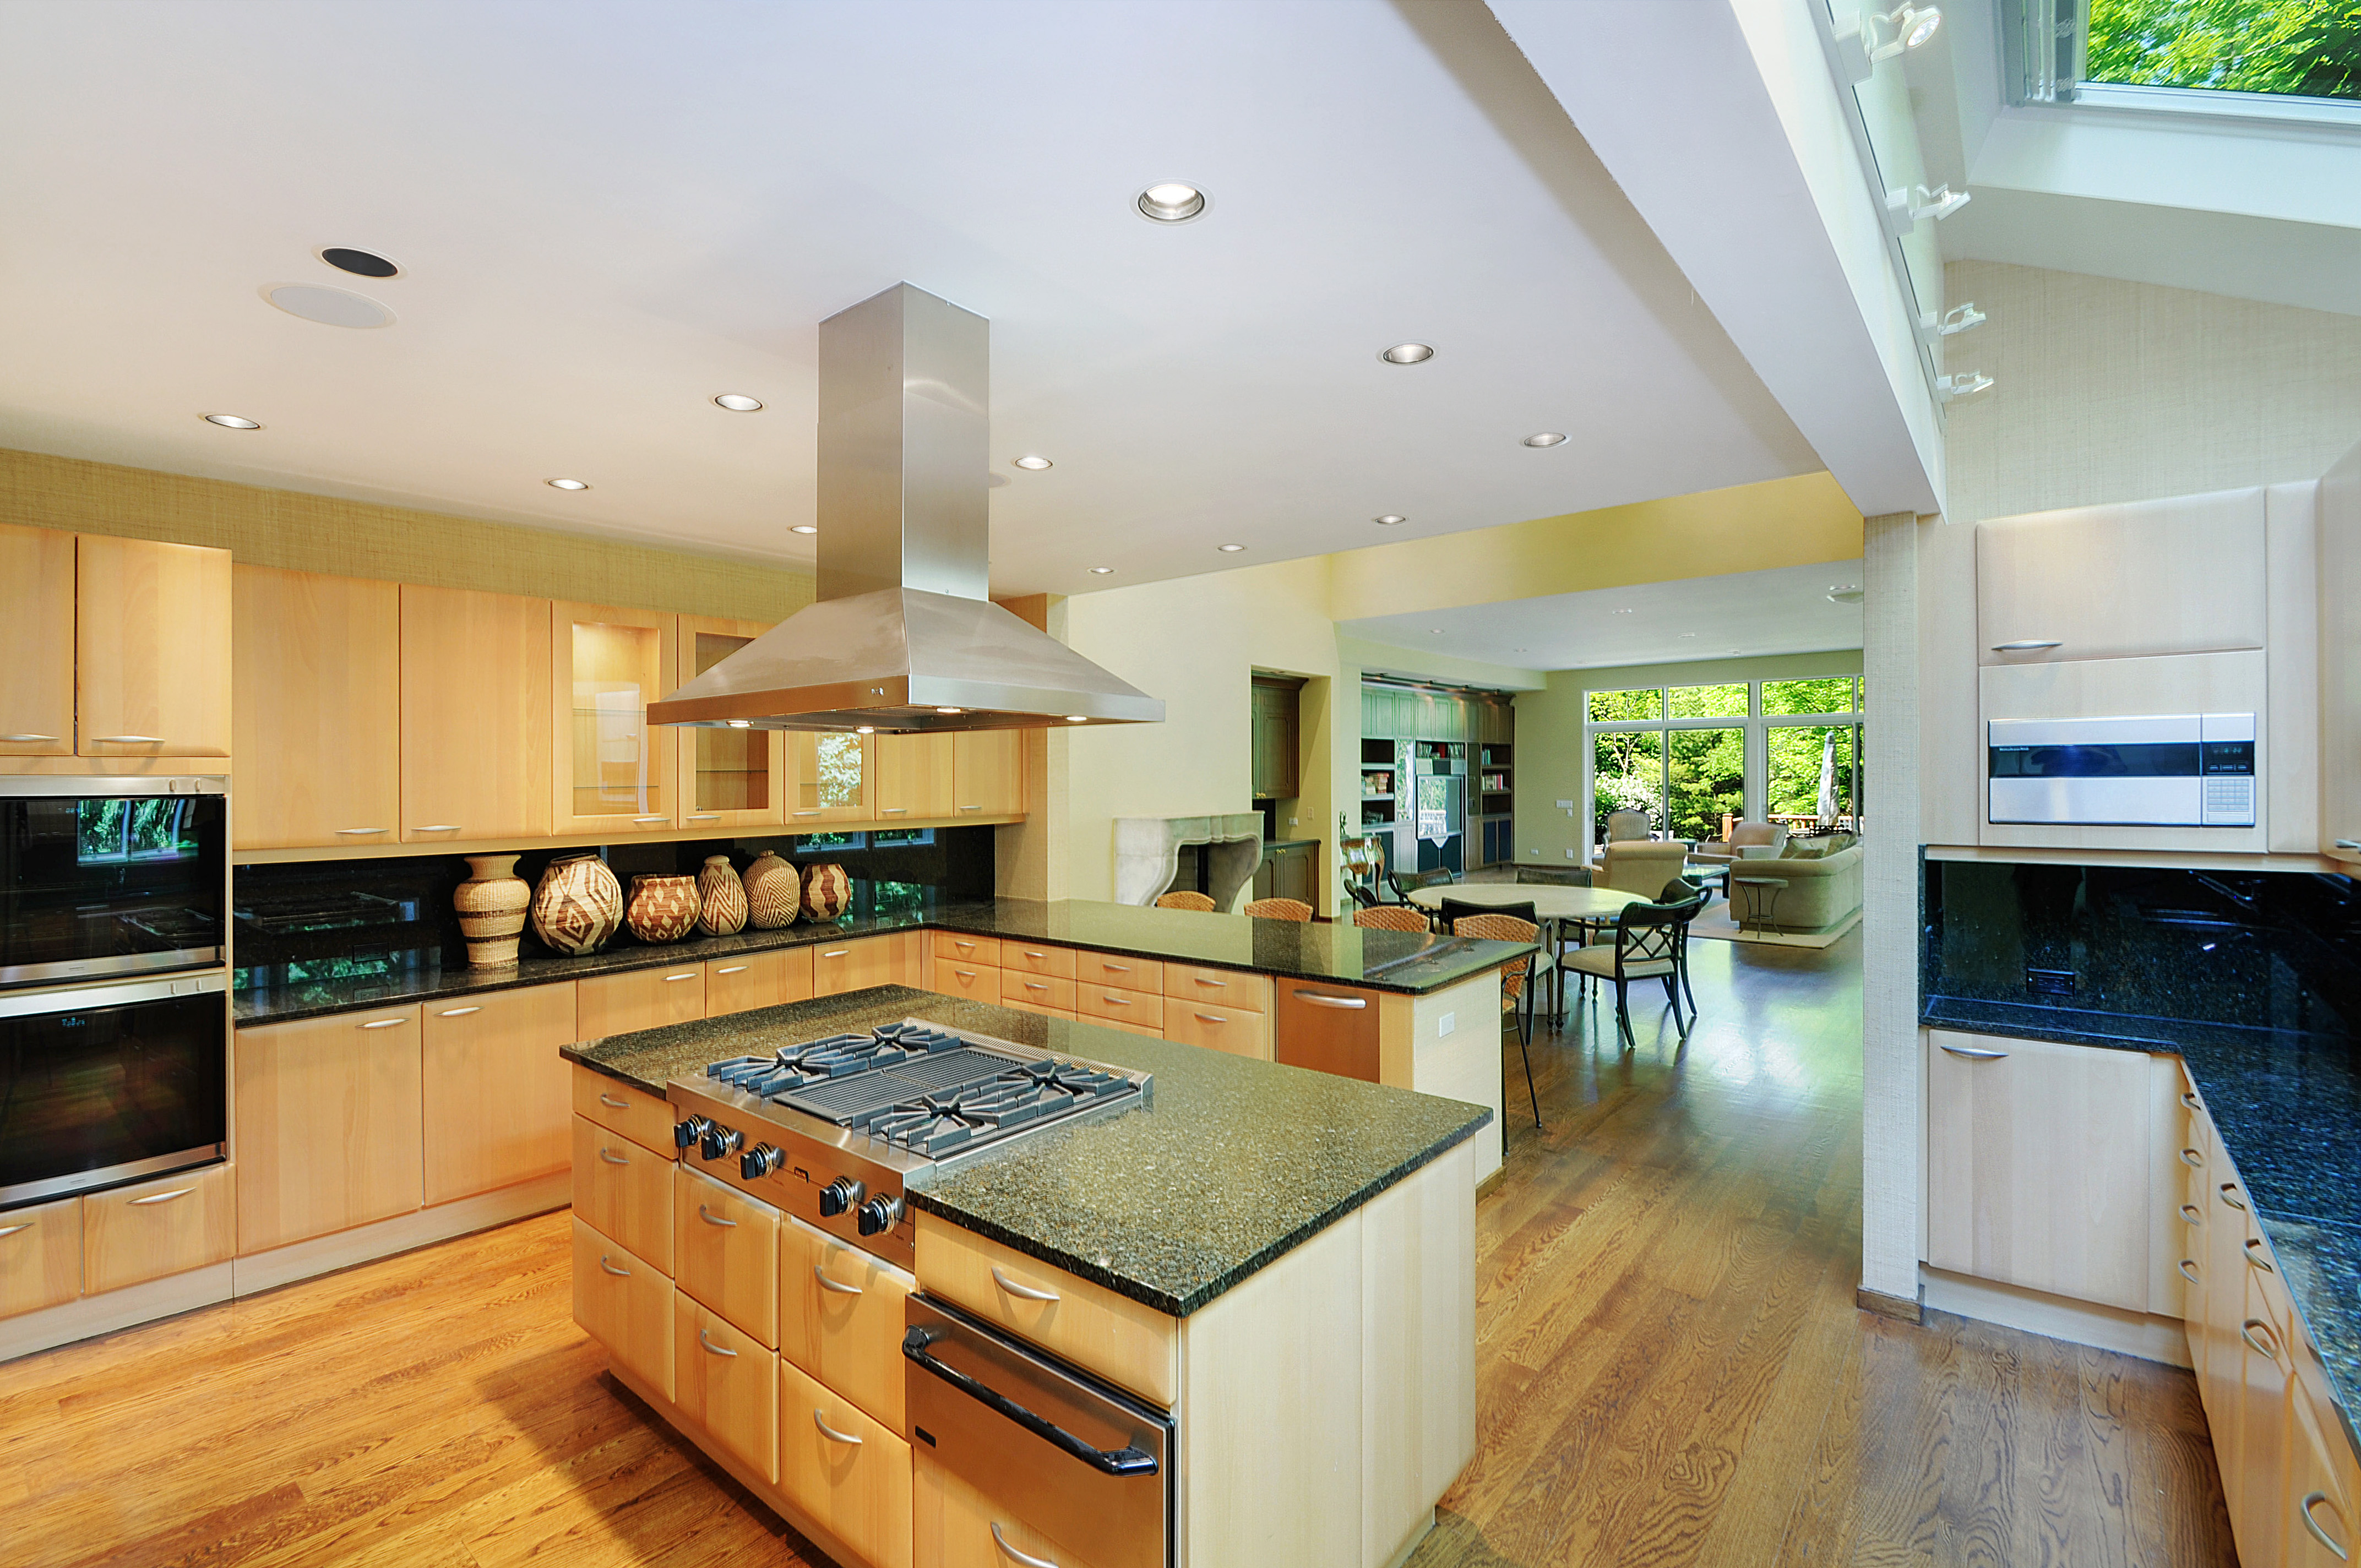 Kitchens: What's Your Ideal Kitchen Type? | The Real Estate Beauty ...